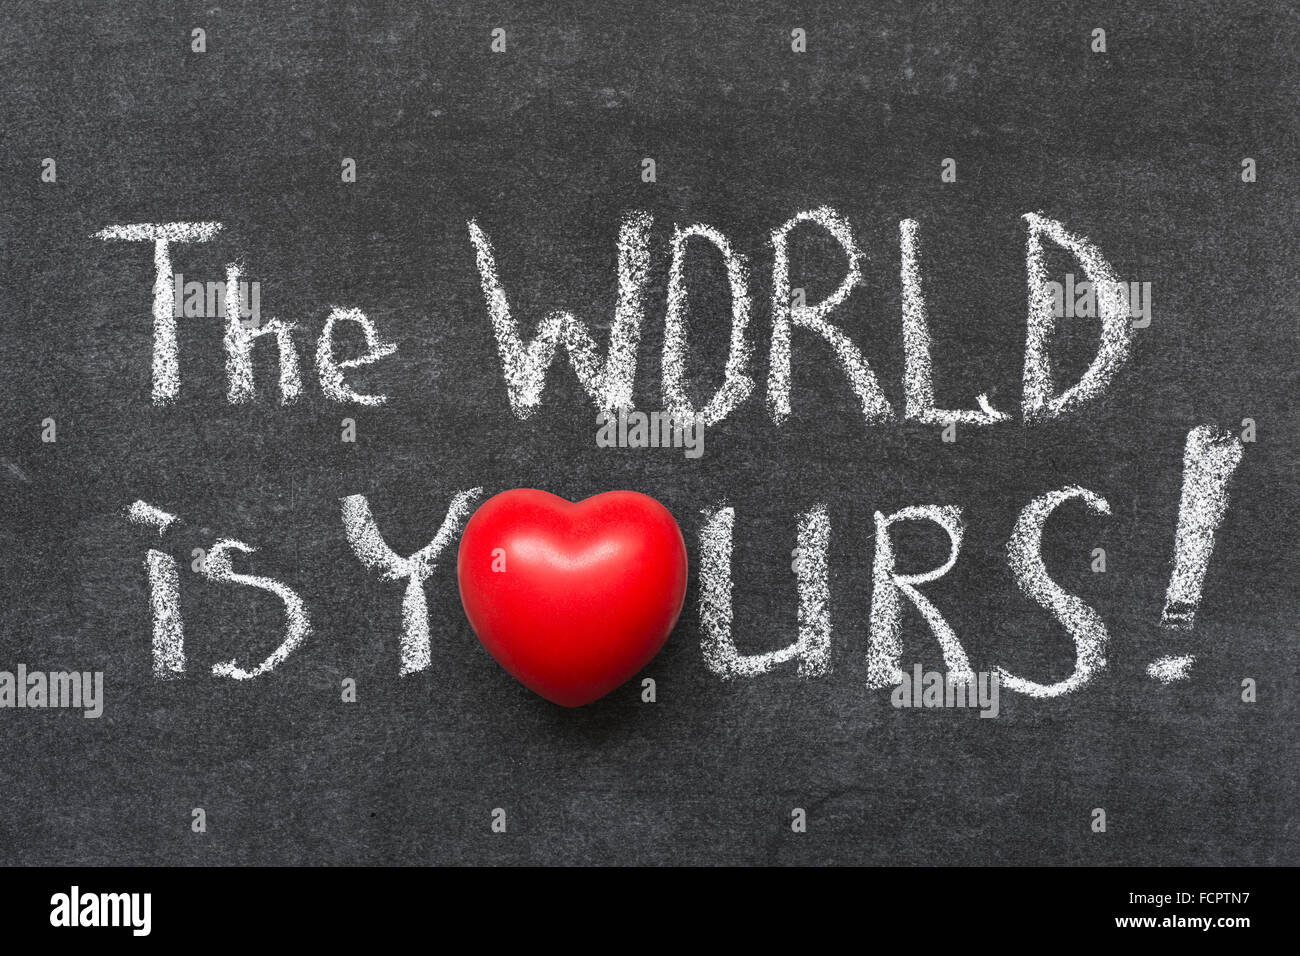 the world is yours exclamation  handwritten on blackboard with heart symbol instead of O Stock Photo